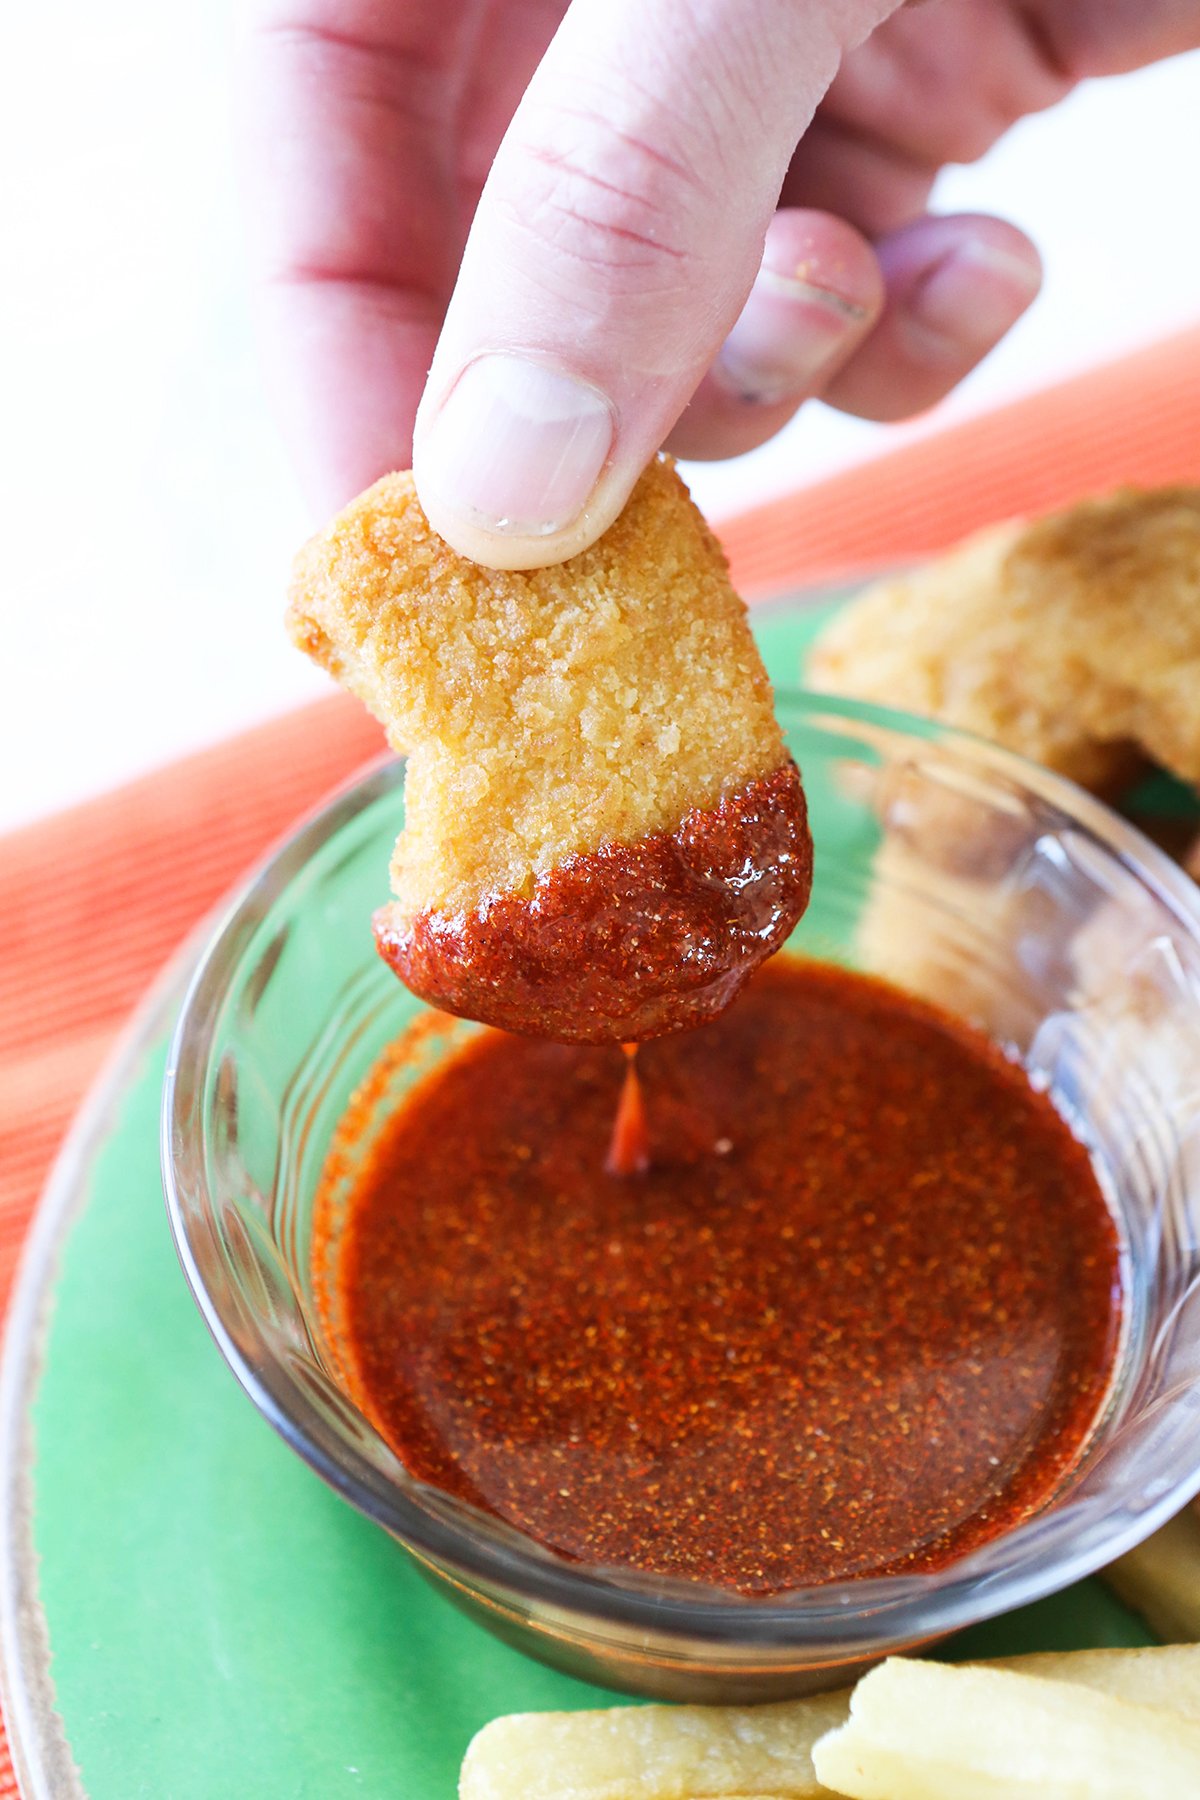 Fingers dipping a chicken nugget into sweet heat sauce.